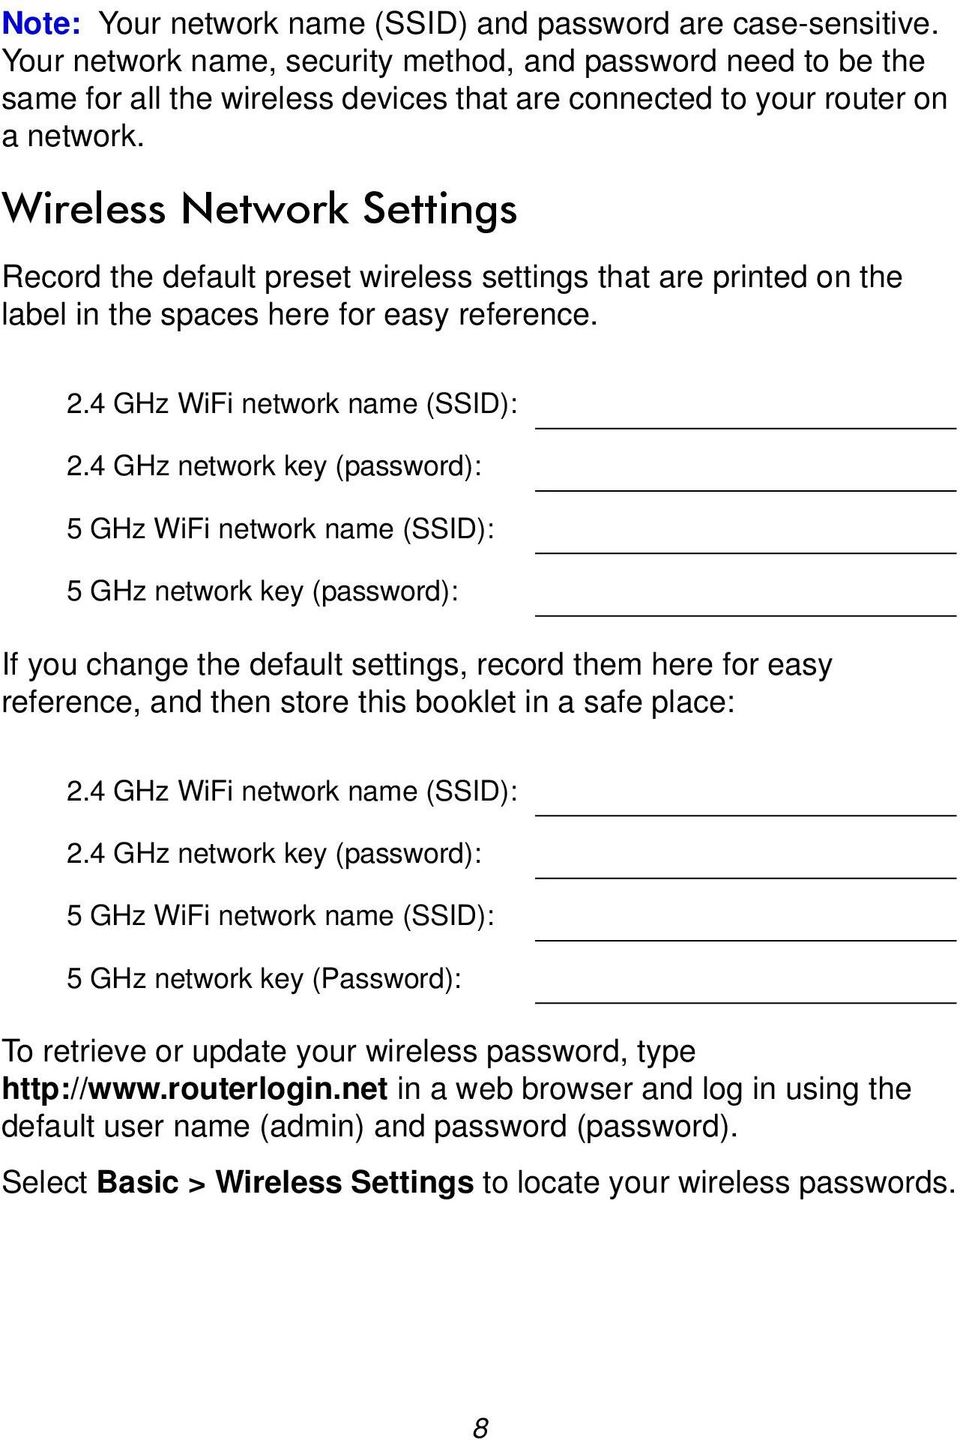 Wireless Network Settings Record the default preset wireless settings that are printed on the label in the spaces here for easy reference. 2.4 GHz WiFi network name (SSID): 2.